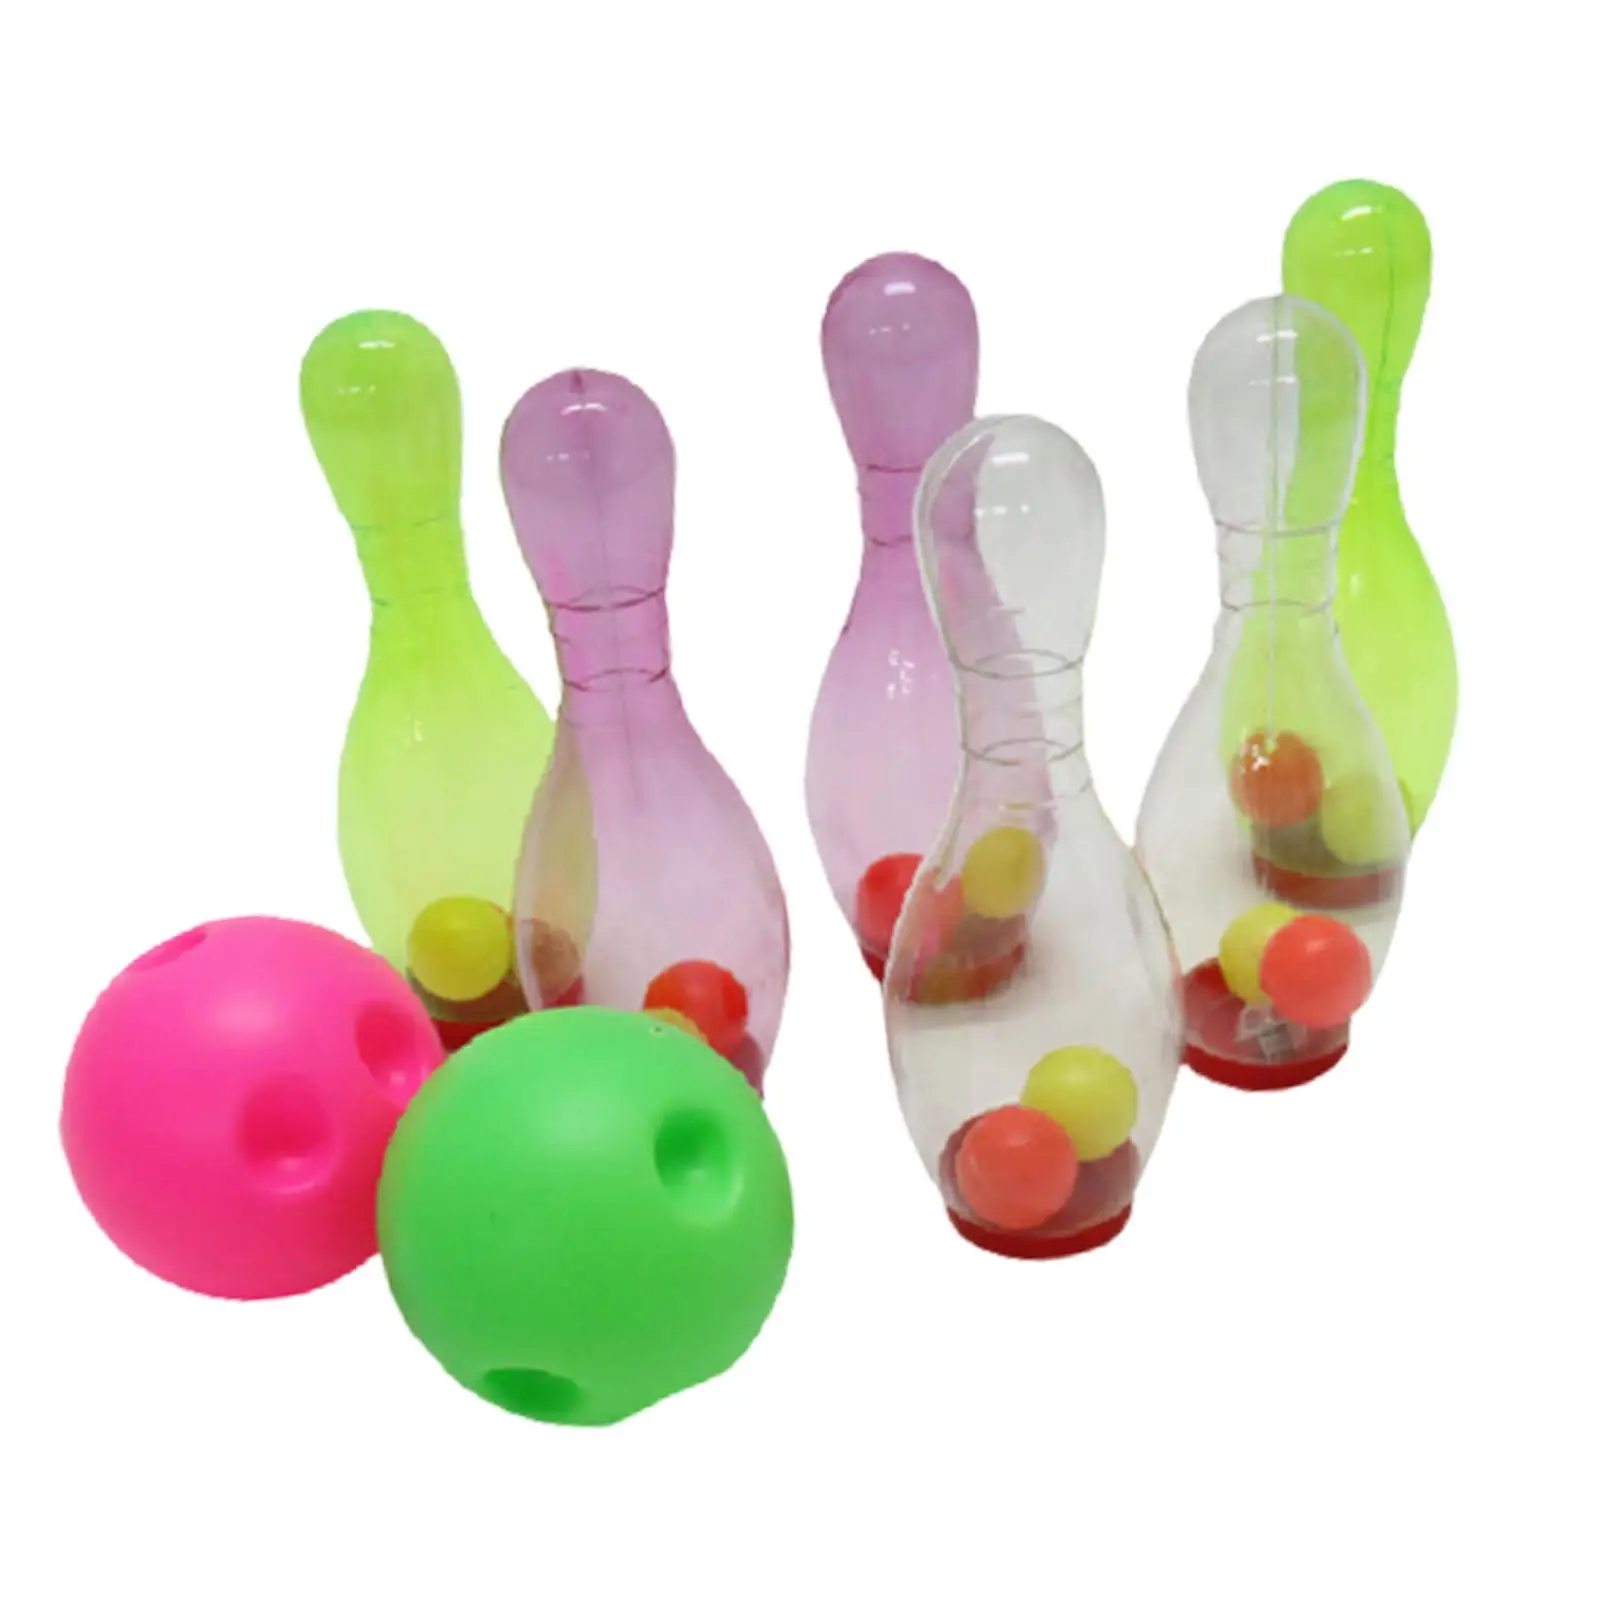 LED Bowling Set Light up Motor Skills Includes 6 Bowling Pins and 2 Ball for Family Activity Birthday Gifts Child Lawn Games